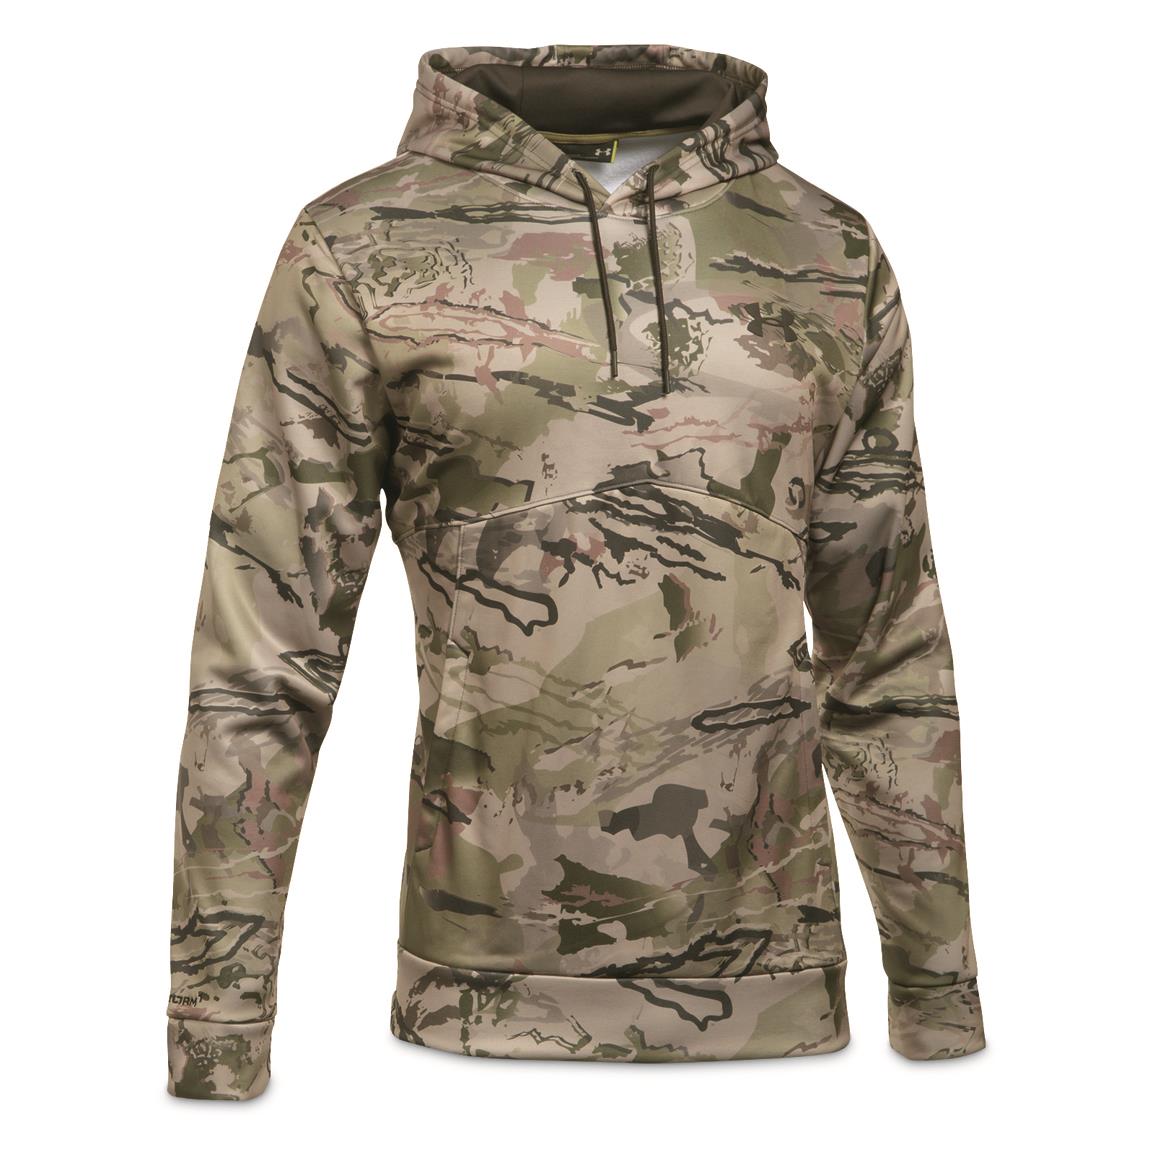 under armor realtree hoodie Sale,up to 